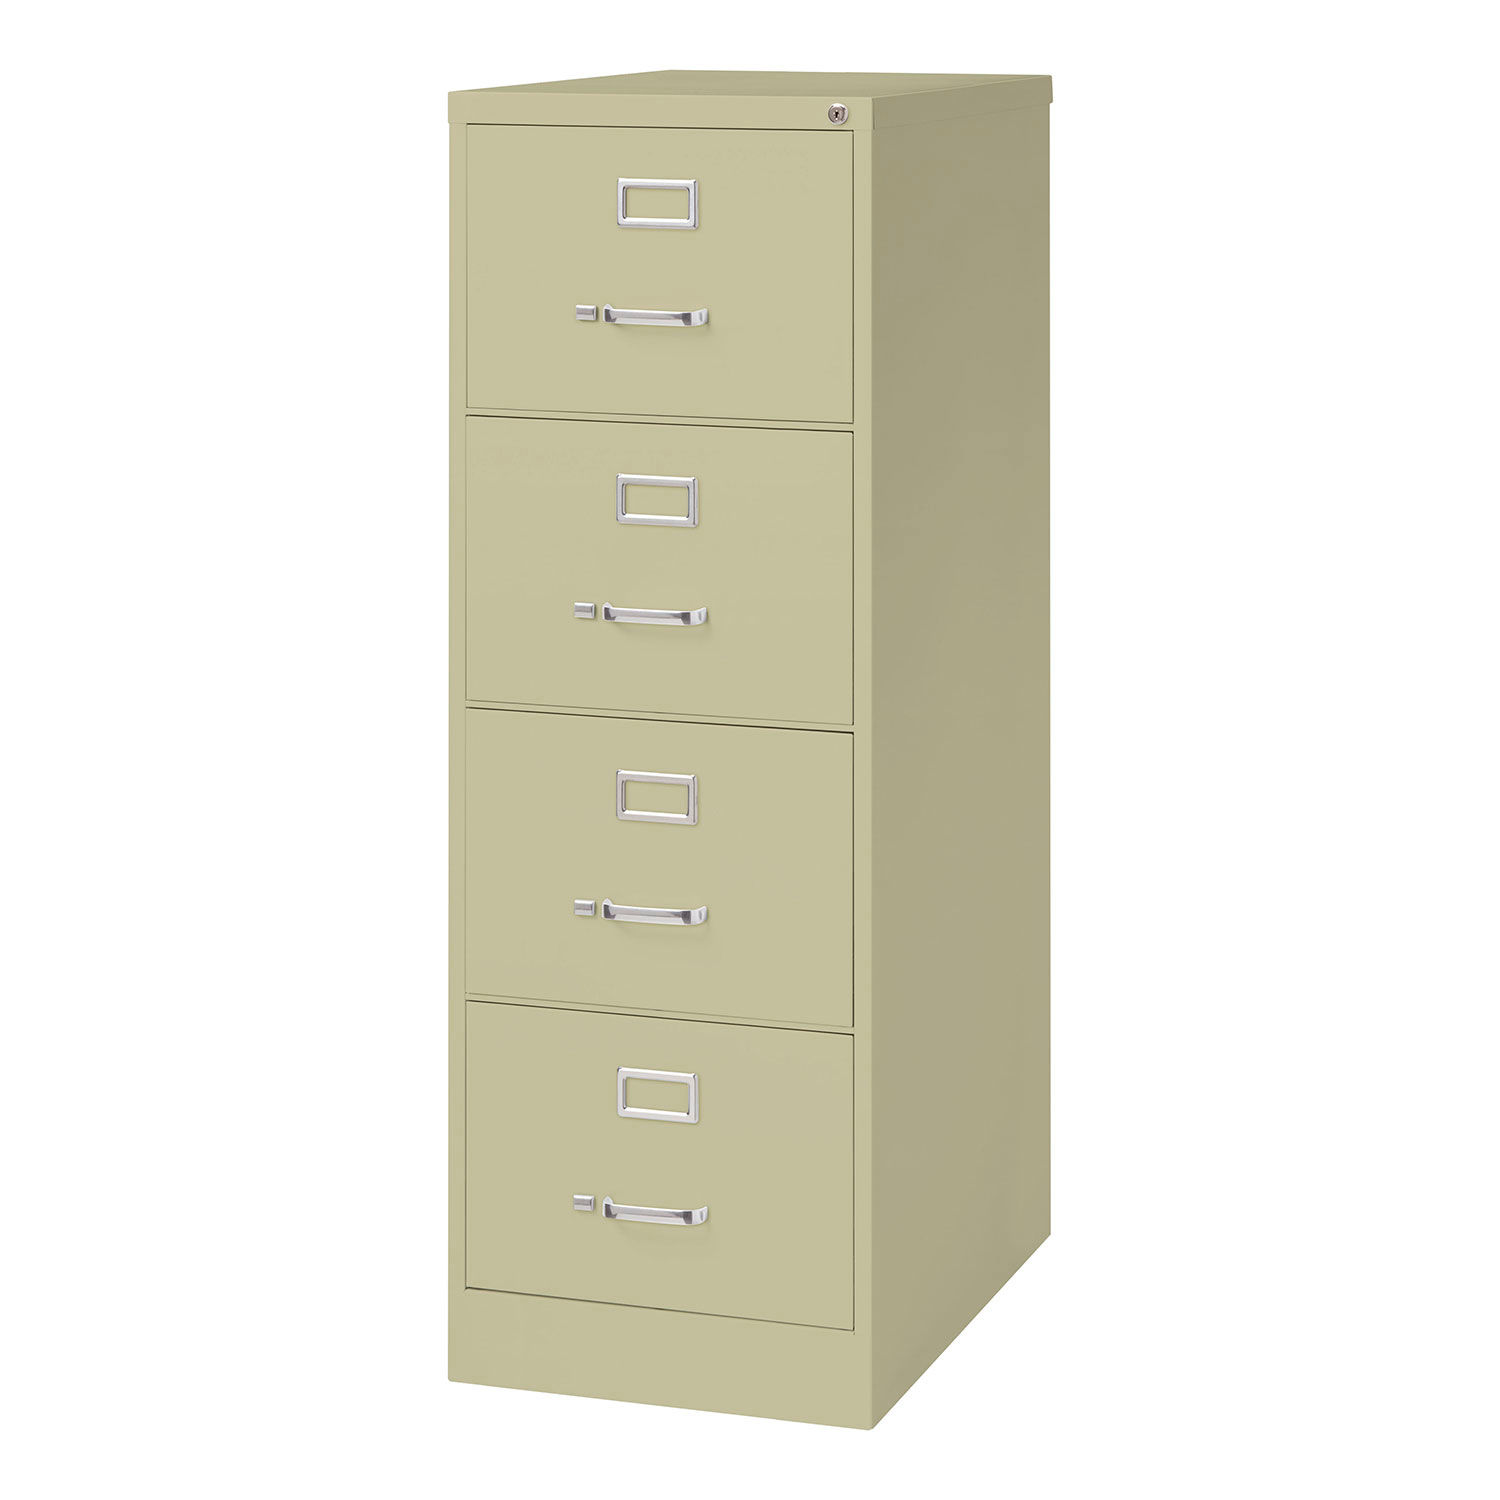 File Cabinets Vertical Hirsh Industries 174 26 1 2 Quot